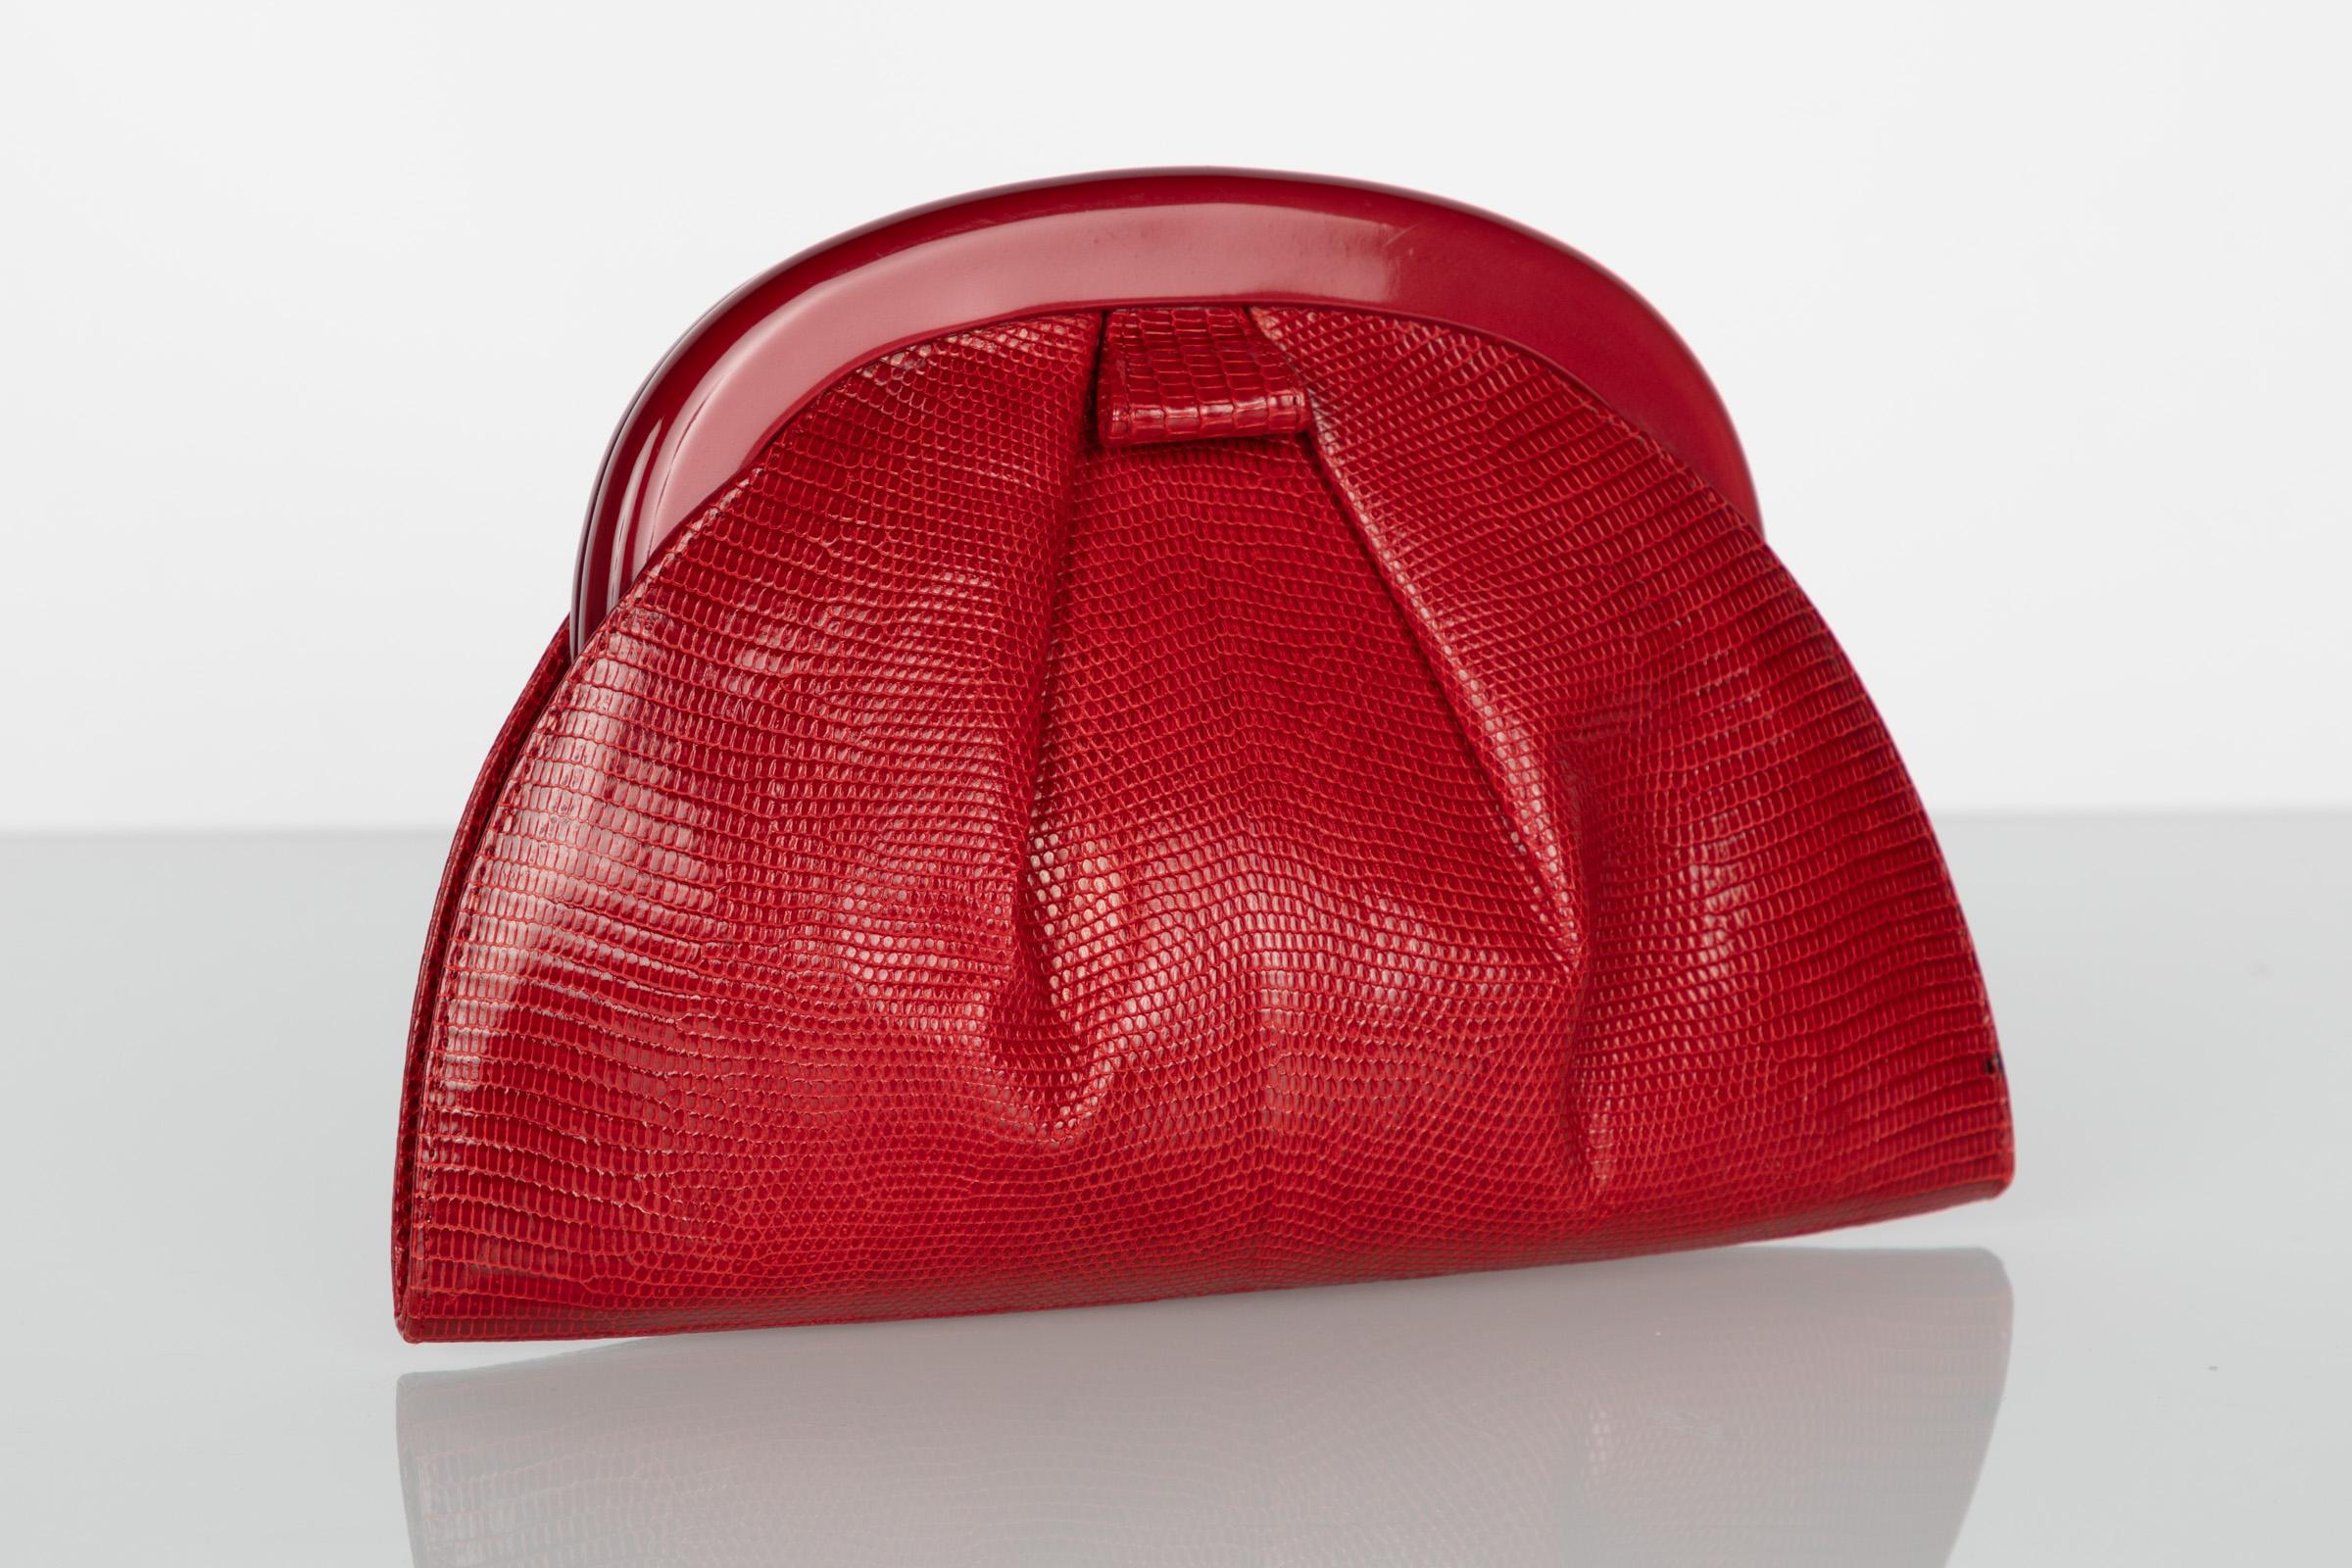 Bottega Veneta is at the pinnacle of fine leather goods and luxury accessories. Through the masterful usage of exotic leathers with clean, artisanal techniques, Bottega Veneta offers quality and timeless accessory designs.  This vintage clamshell